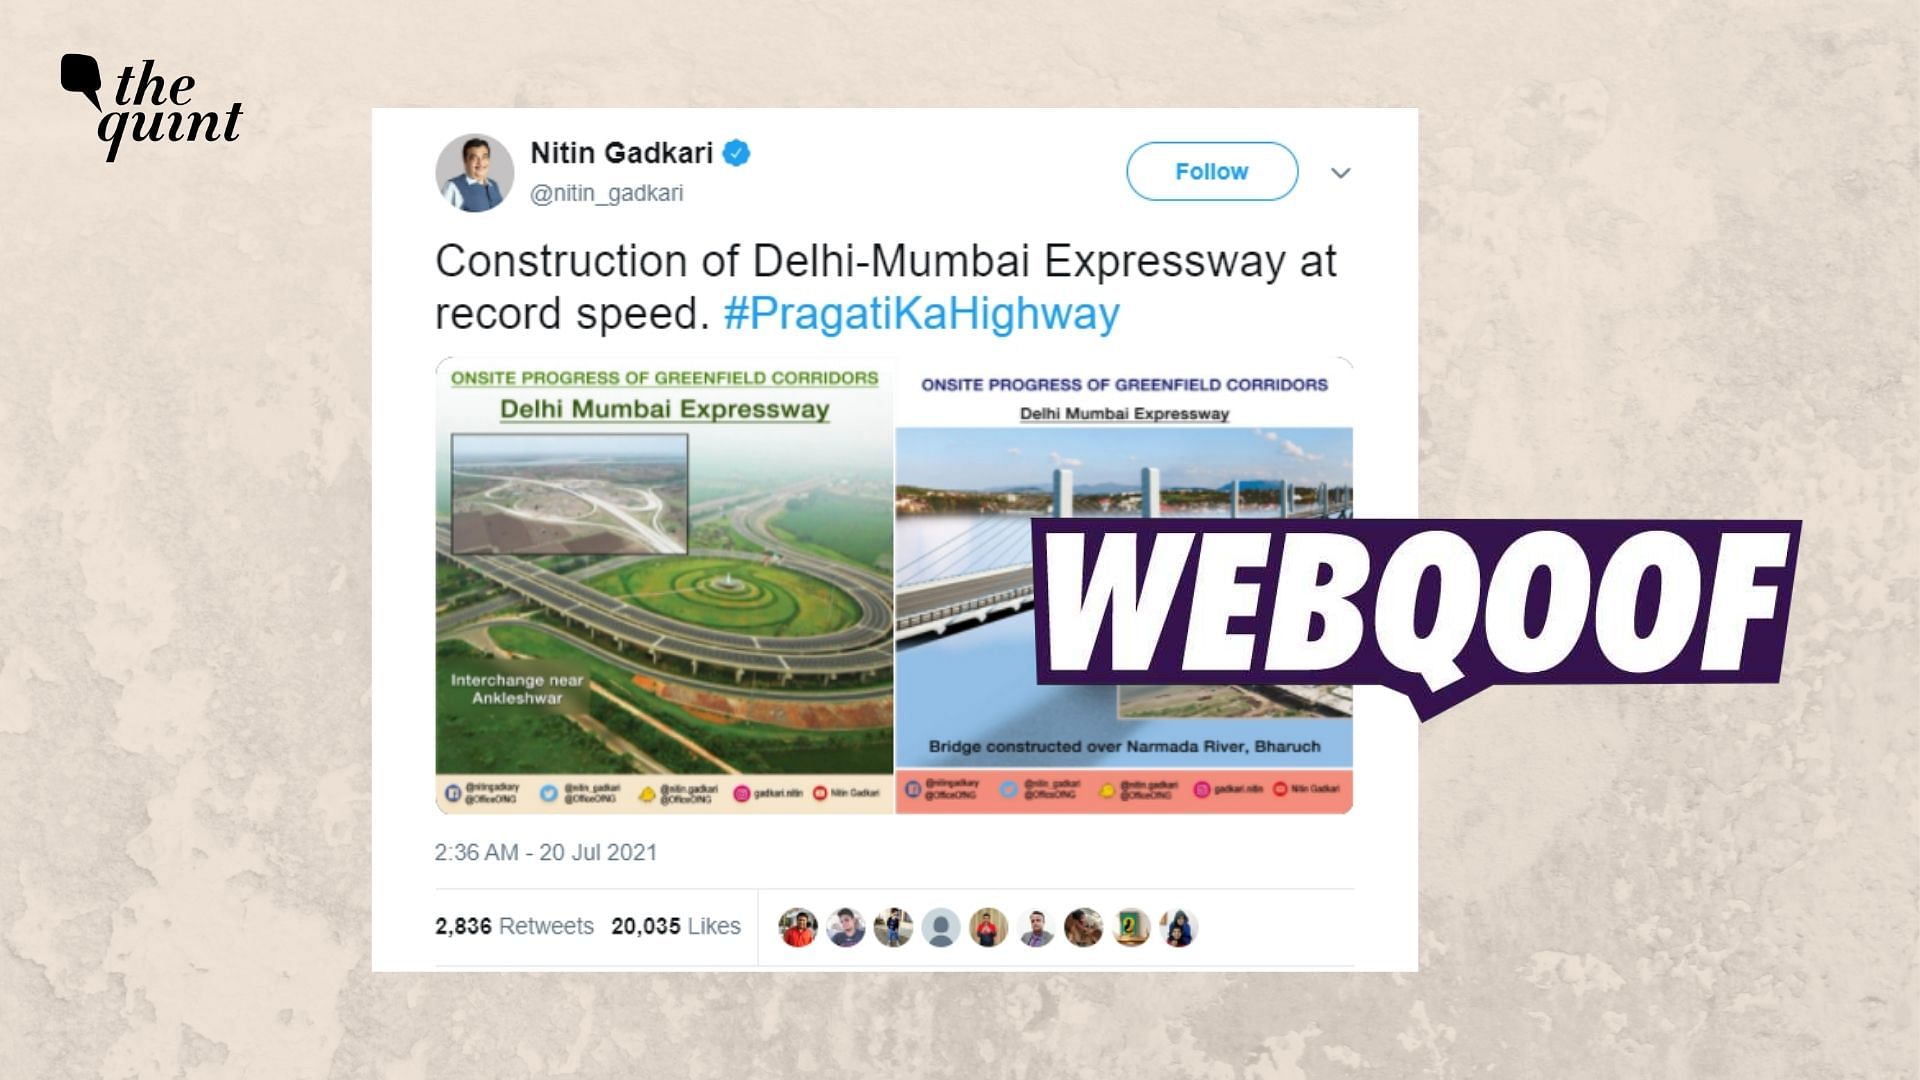 <div class="paragraphs"><p>The Union Minister shared a photo of the Yamuna Expressway in Uttar Pradesh as one of the upcoming Delhi-Mumbai Expressway.</p></div>